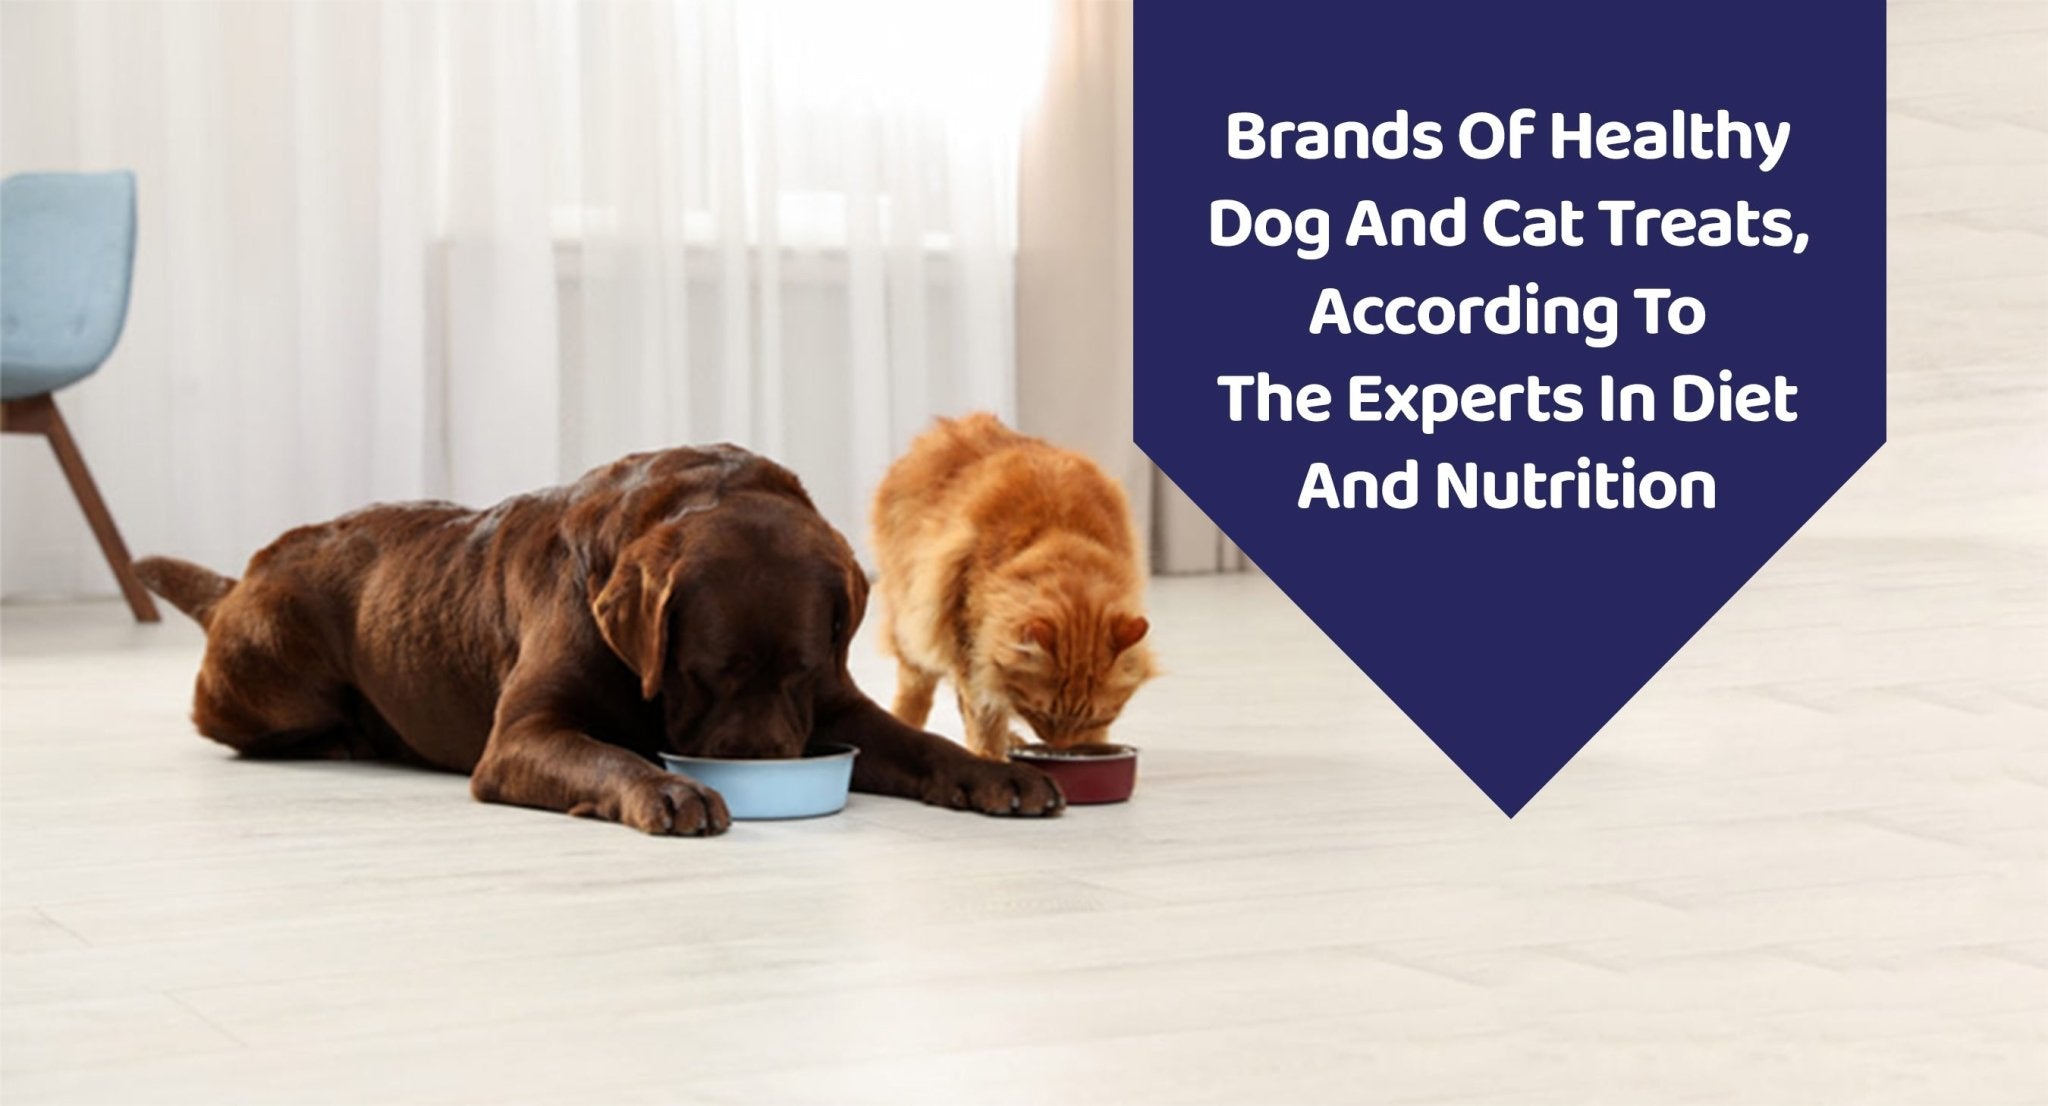 Brands Of Healthy Dog And Cat Treats, According To The Experts In Diet And Nutrition